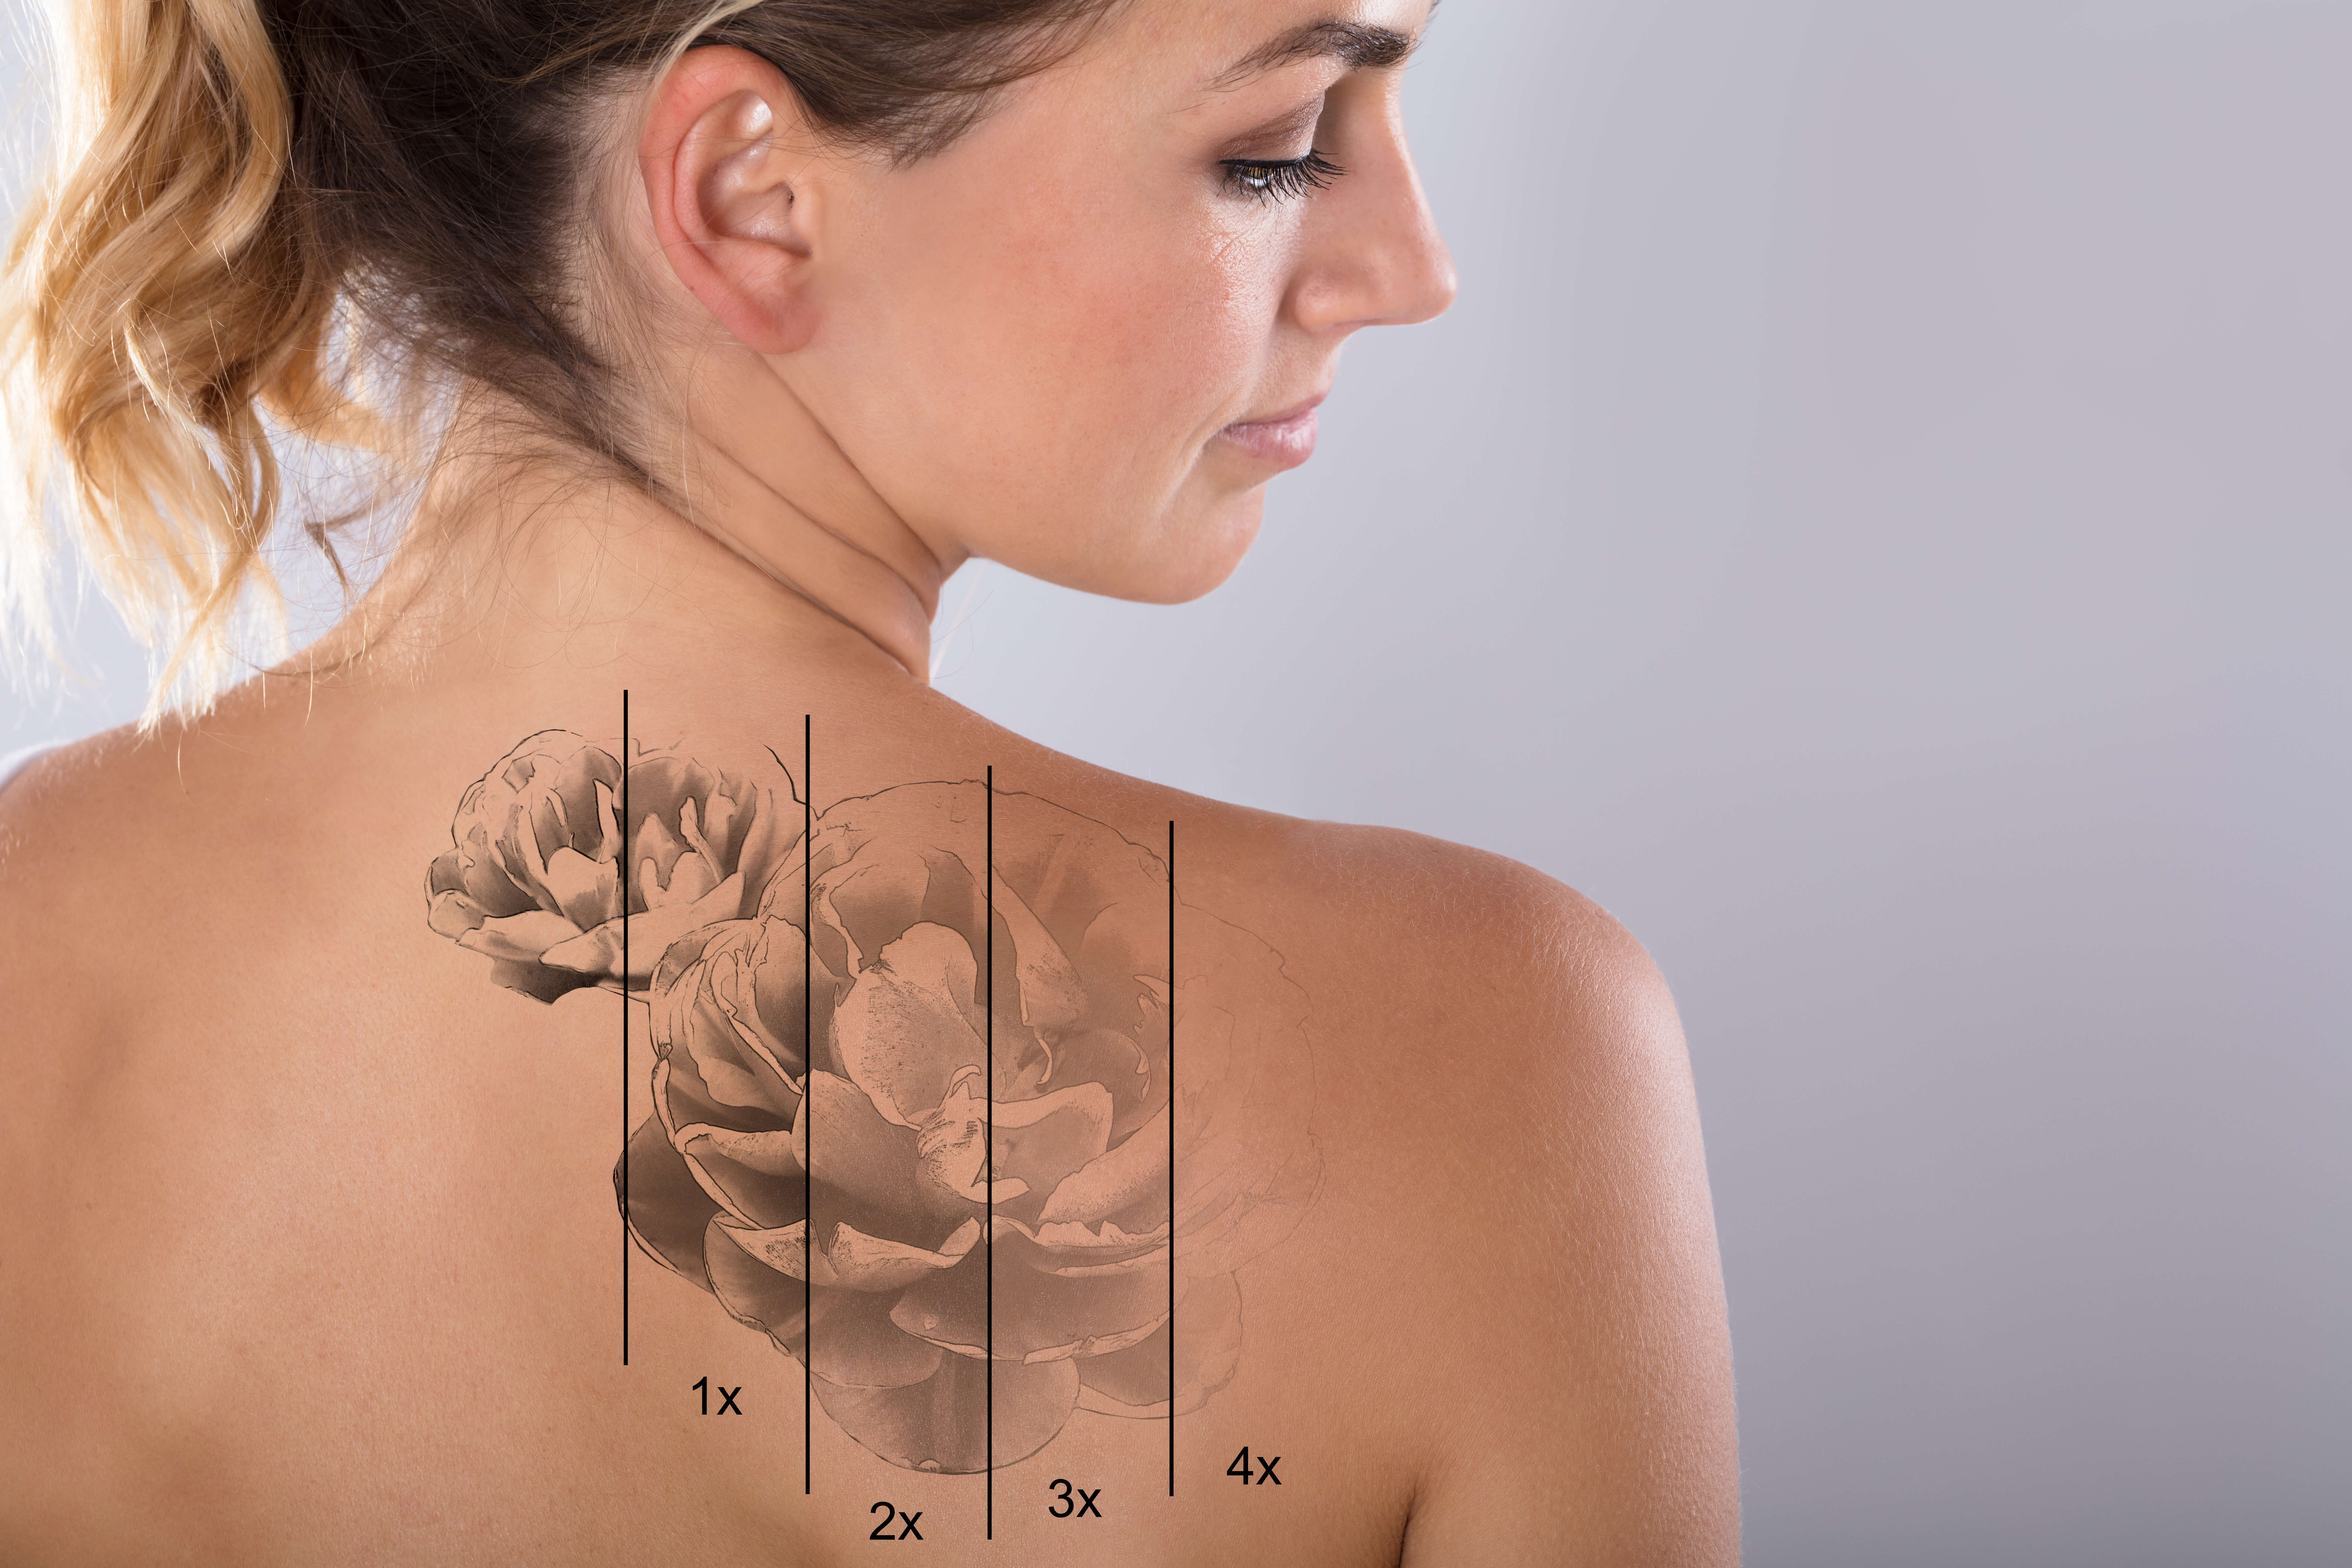 Tattoo Removal in Dallas TX - National Laser Institute Medical Spa